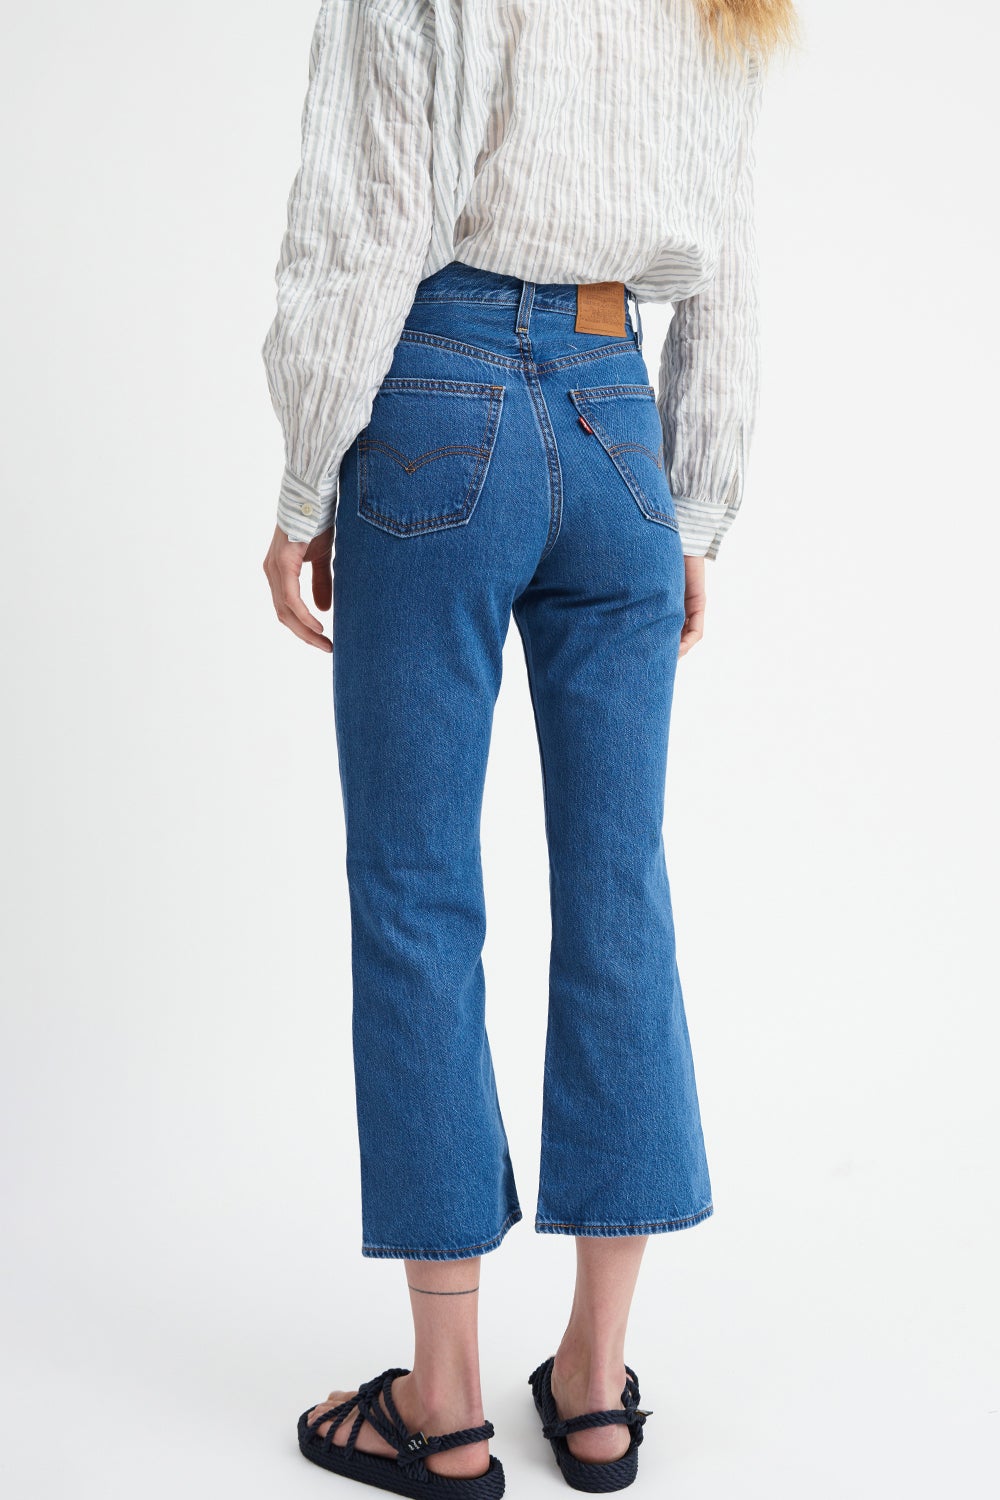 Levi's Math Club Flare Jeans Noe Numbers